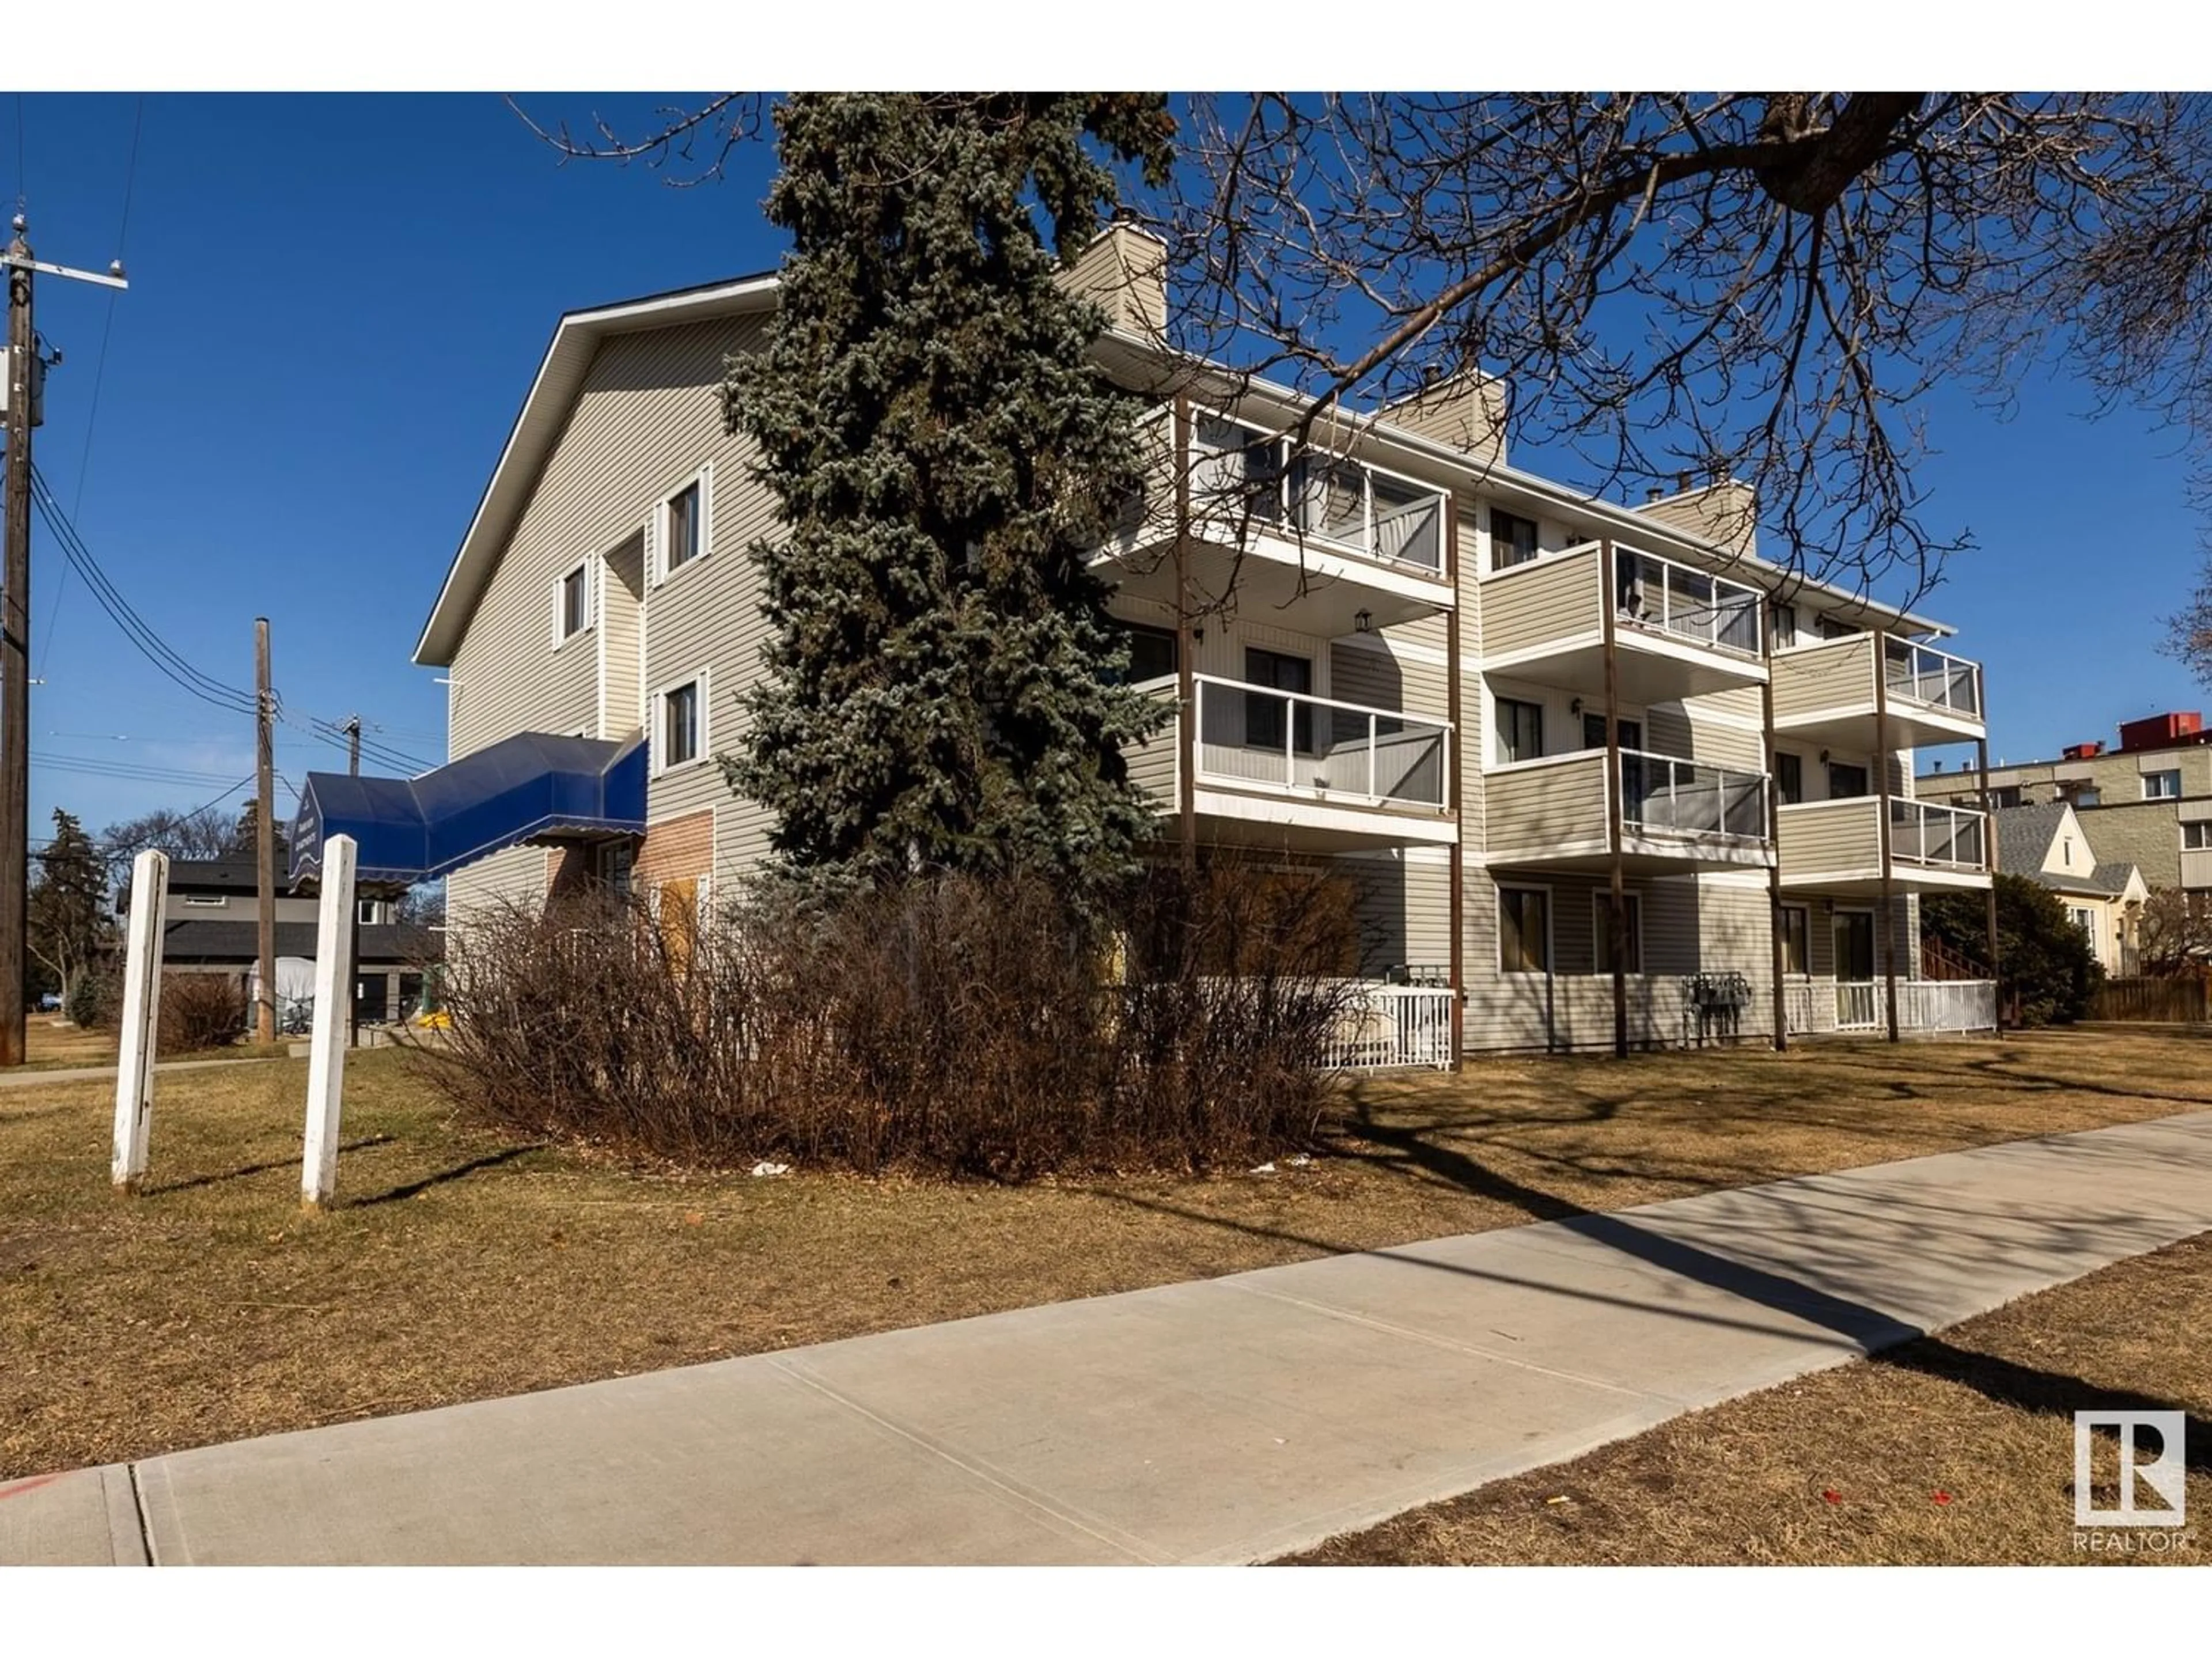 A pic from exterior of the house or condo for #103 10604 110 AV NW, Edmonton Alberta T5H4C7